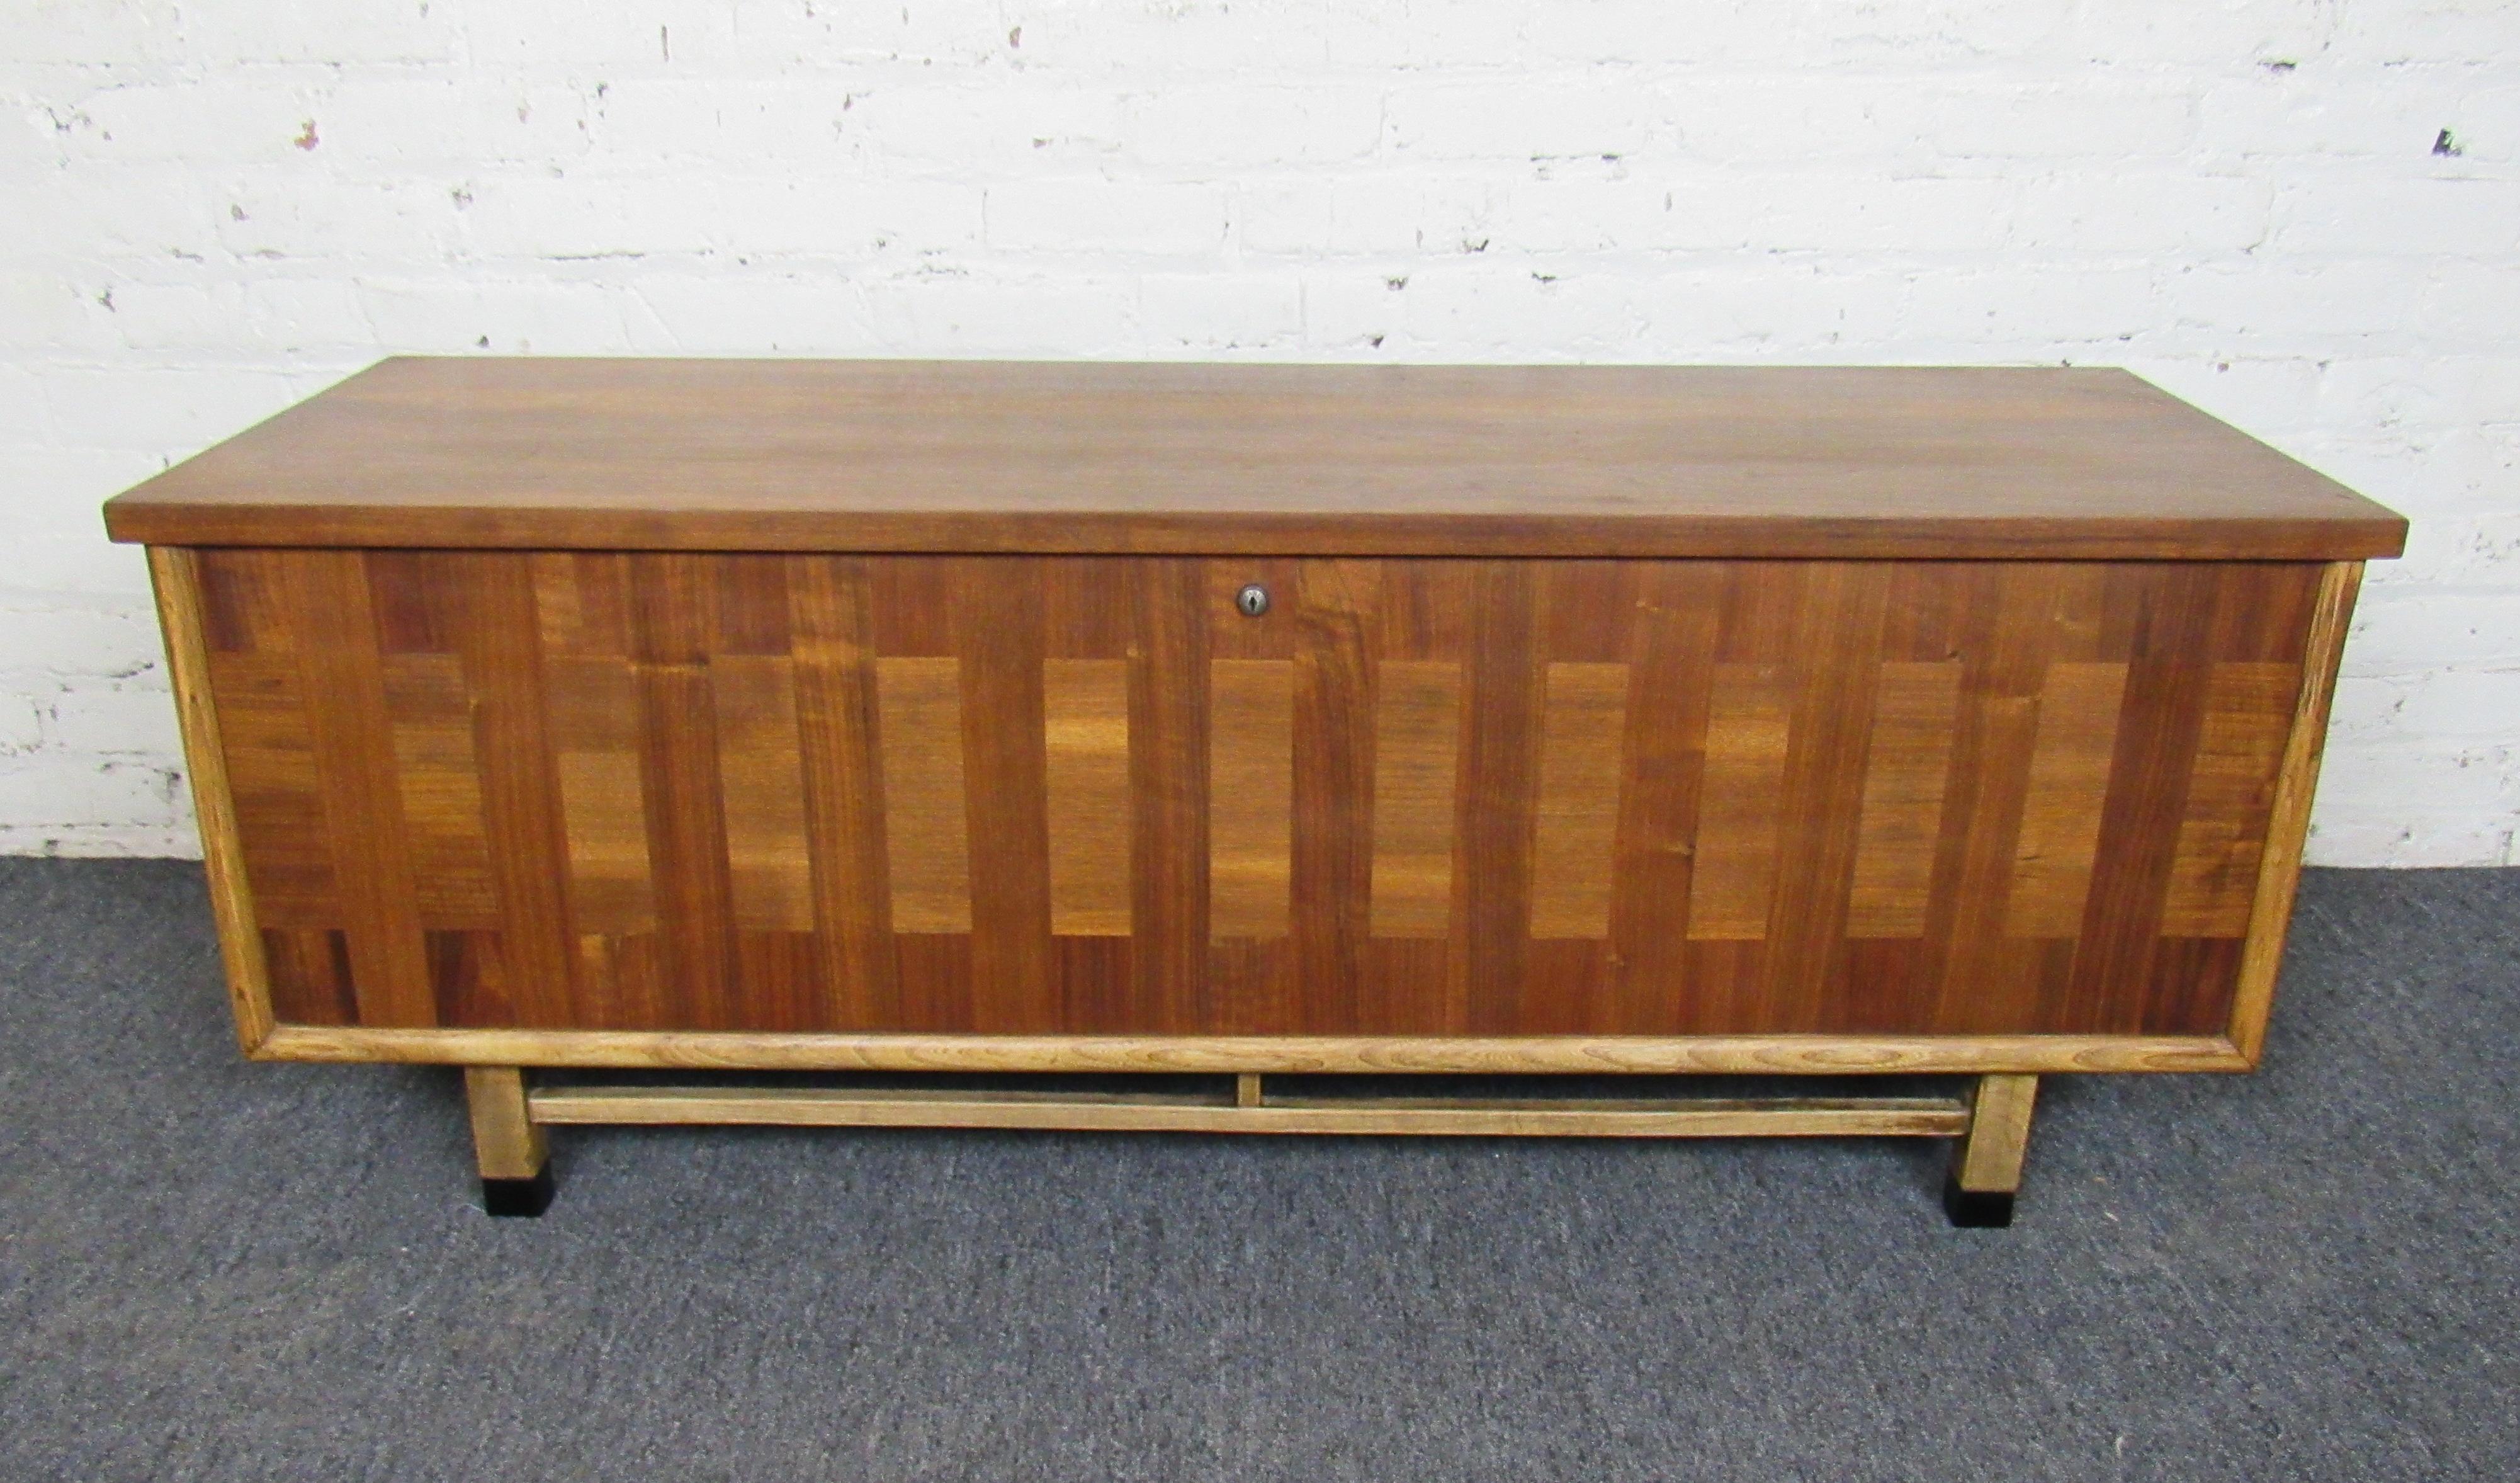 A beautiful and sturdy midcentury trunk by Lane Furniture Co., this piece combines midcentury style with lasting quality. Rich walnut woodgrain is complimented by lighter oak trim and legs. 

Please confirm the item location with owner (NY or